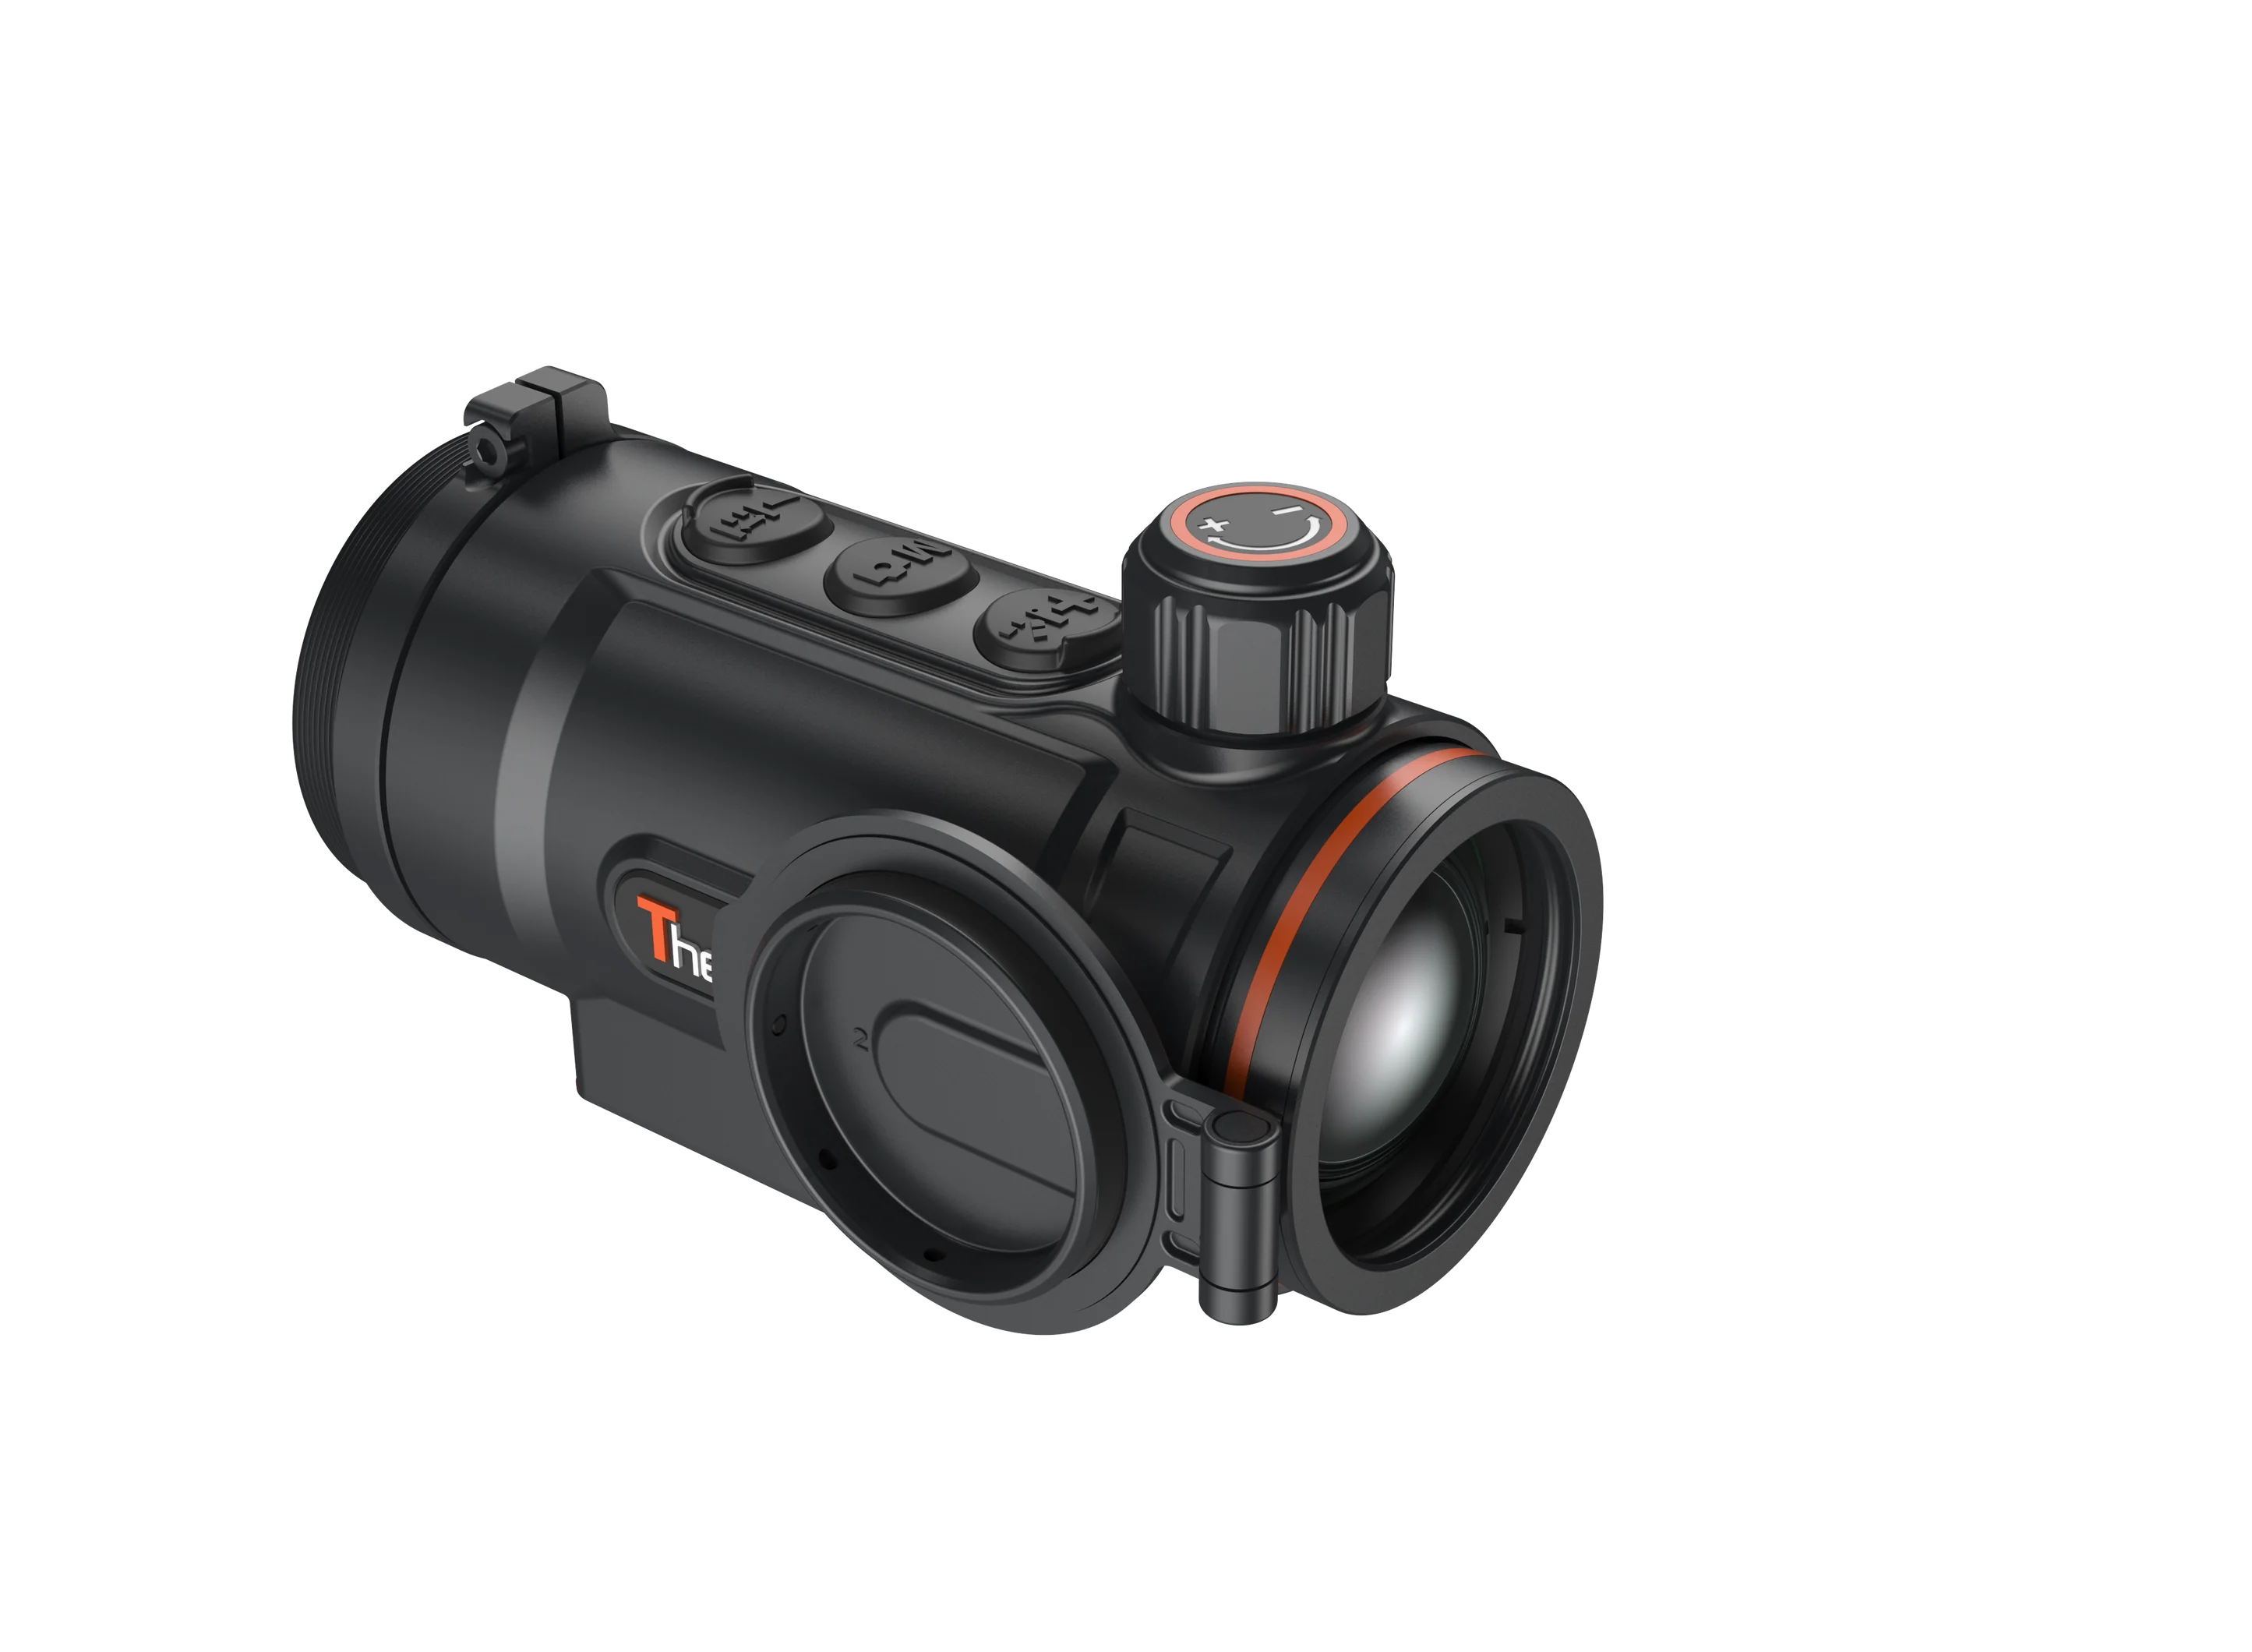 Thunder Clip-On Thermal Monocular